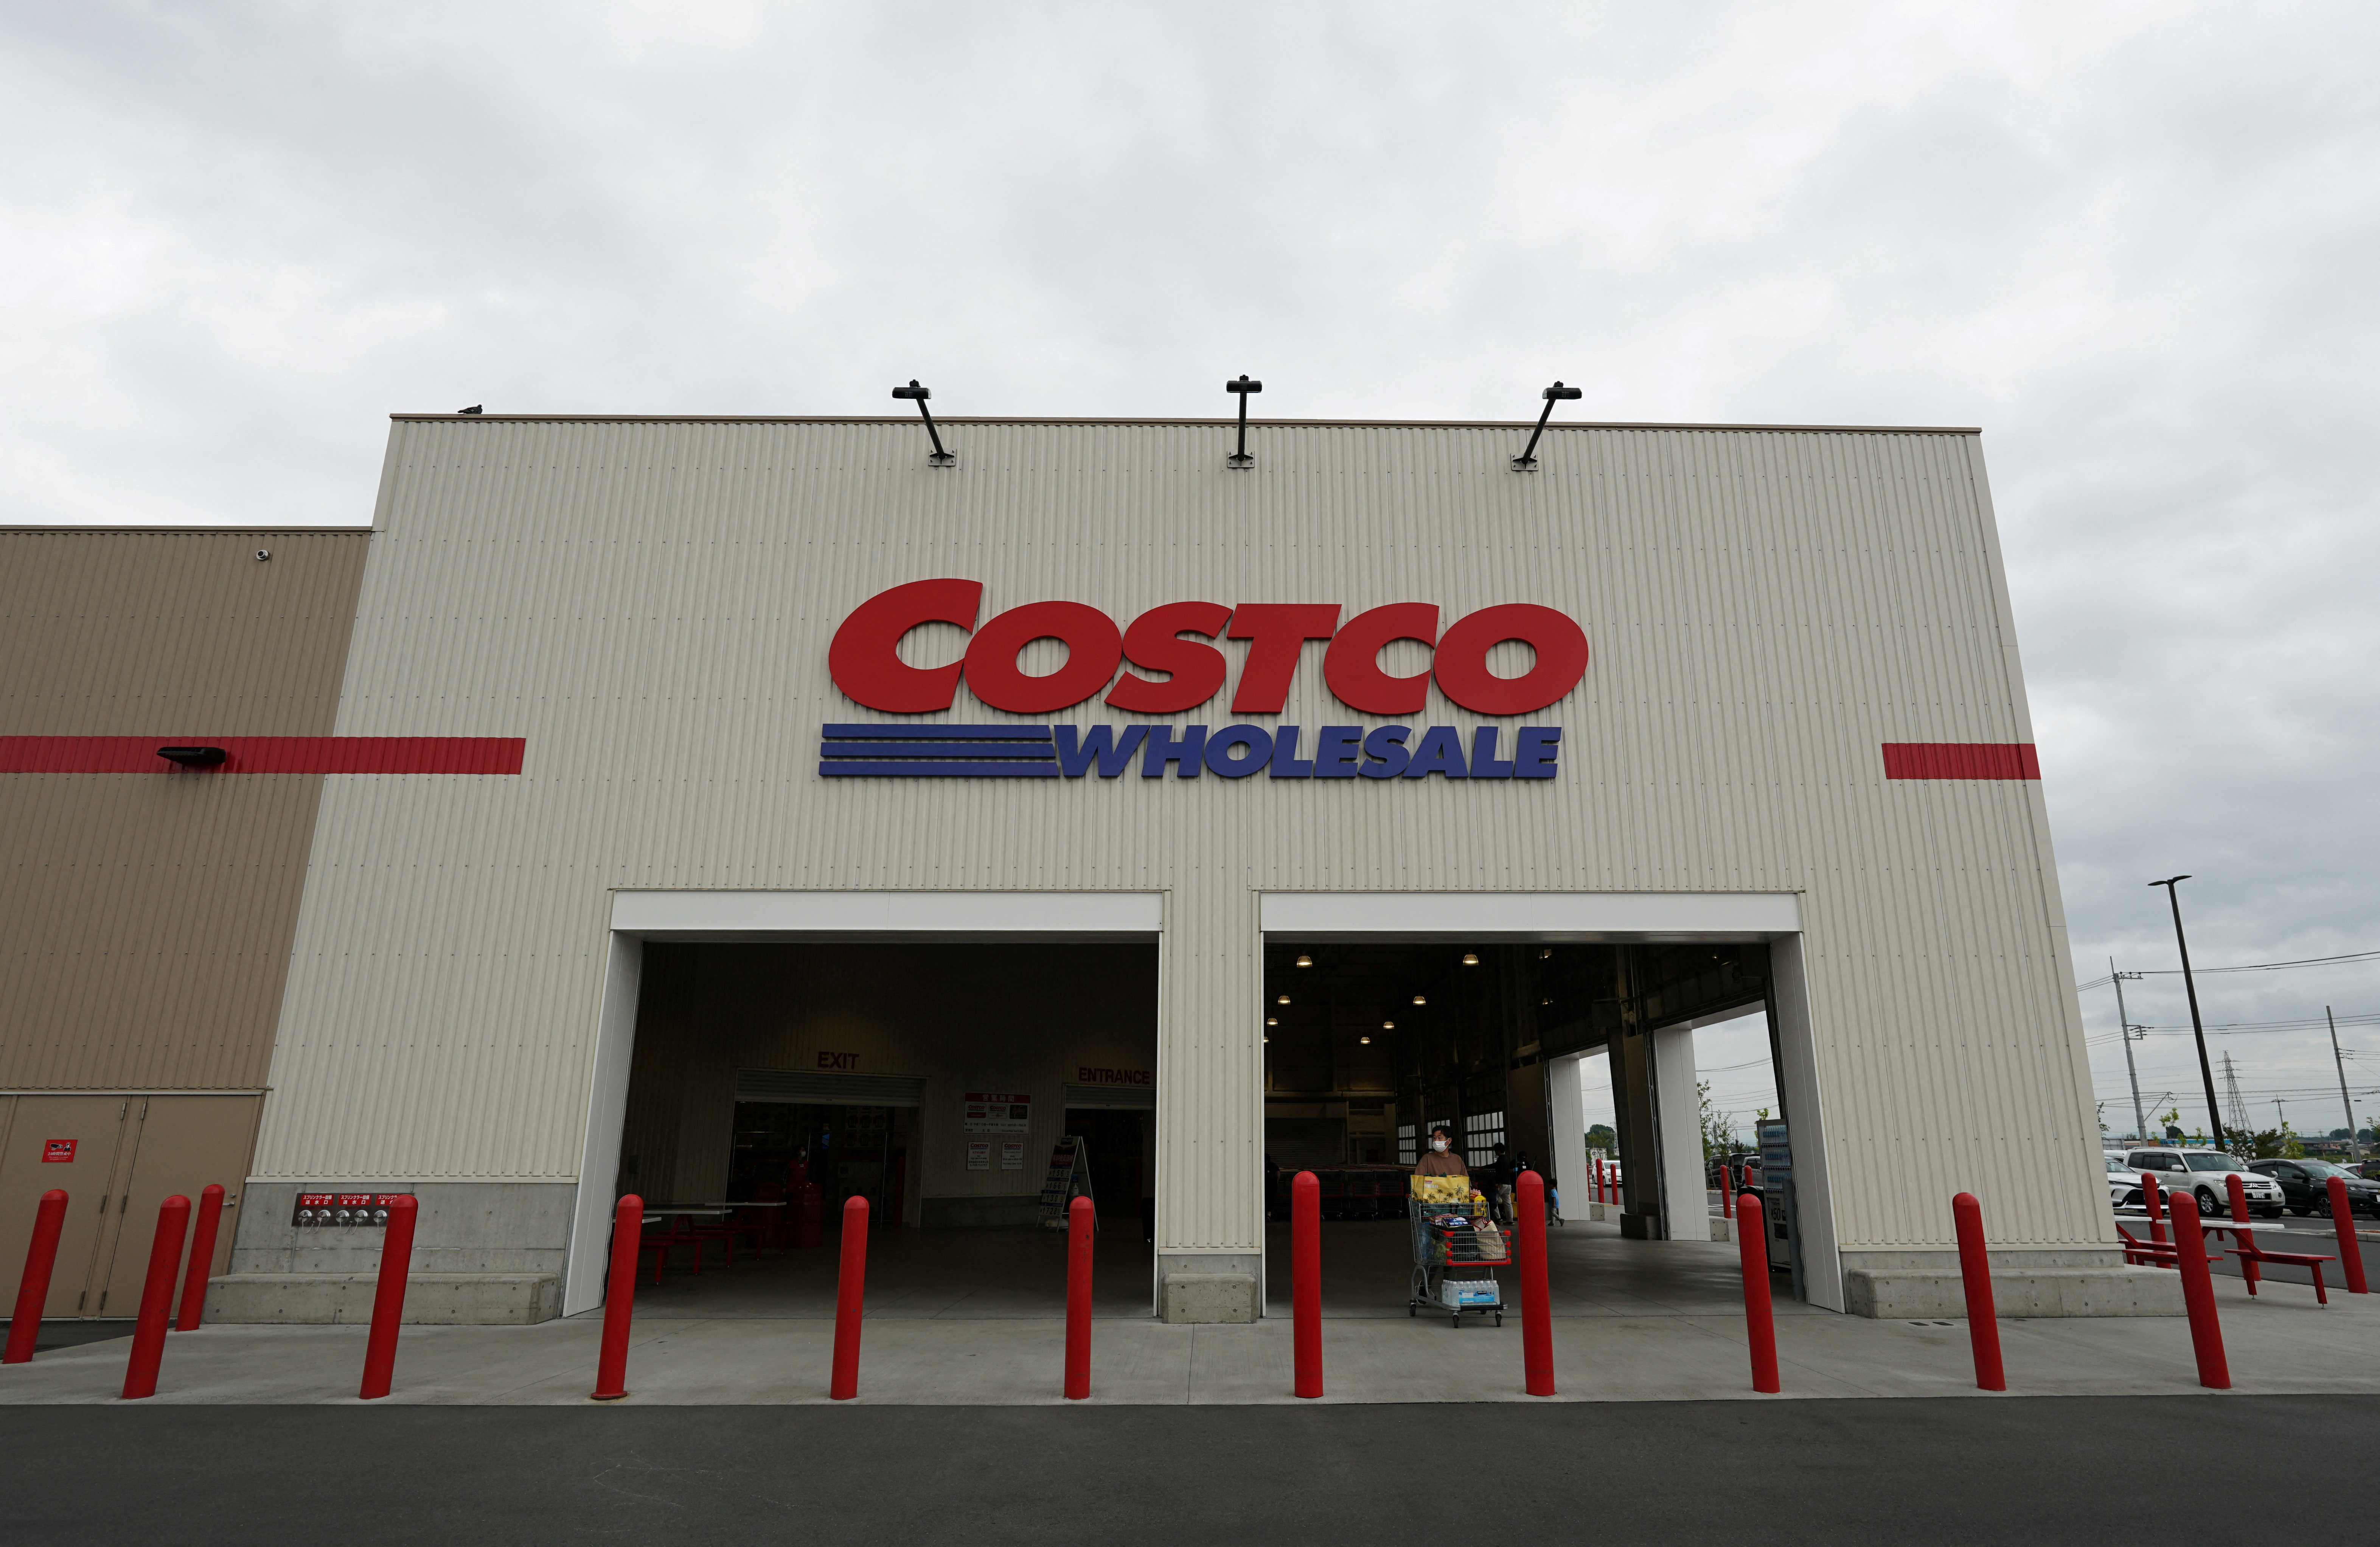 A view of a Costco store in Meiwa